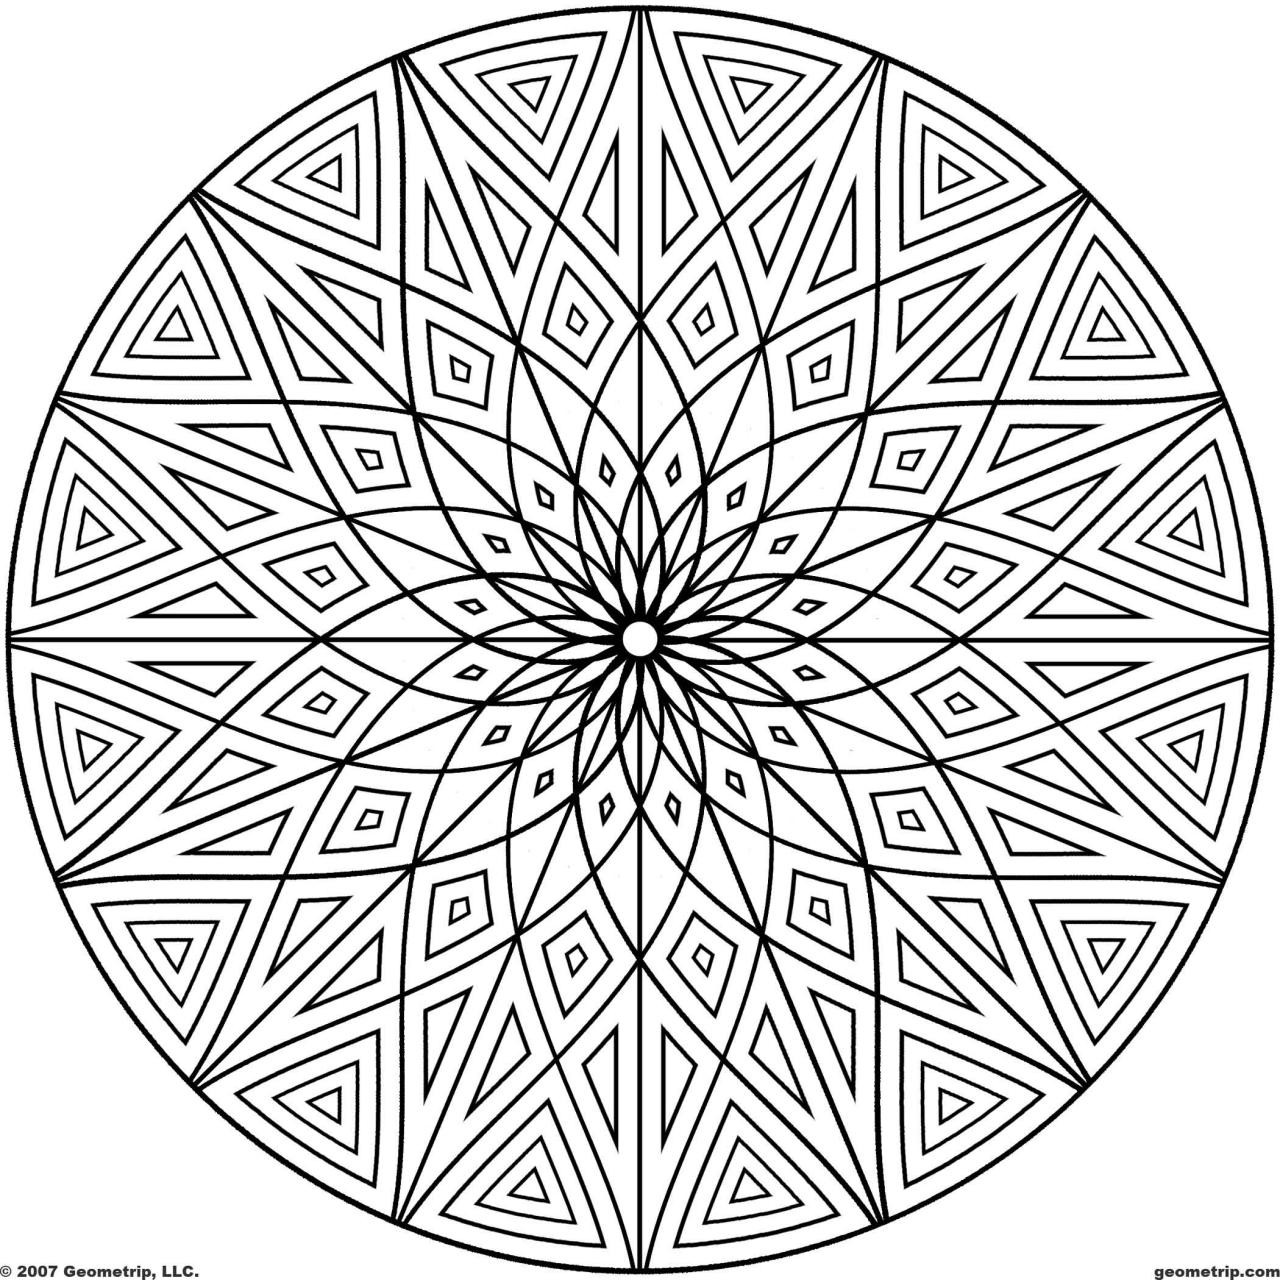 Geometric Coloring Pages For Kids
 Coloring Design Page Geometric Patterns Coloring Page For